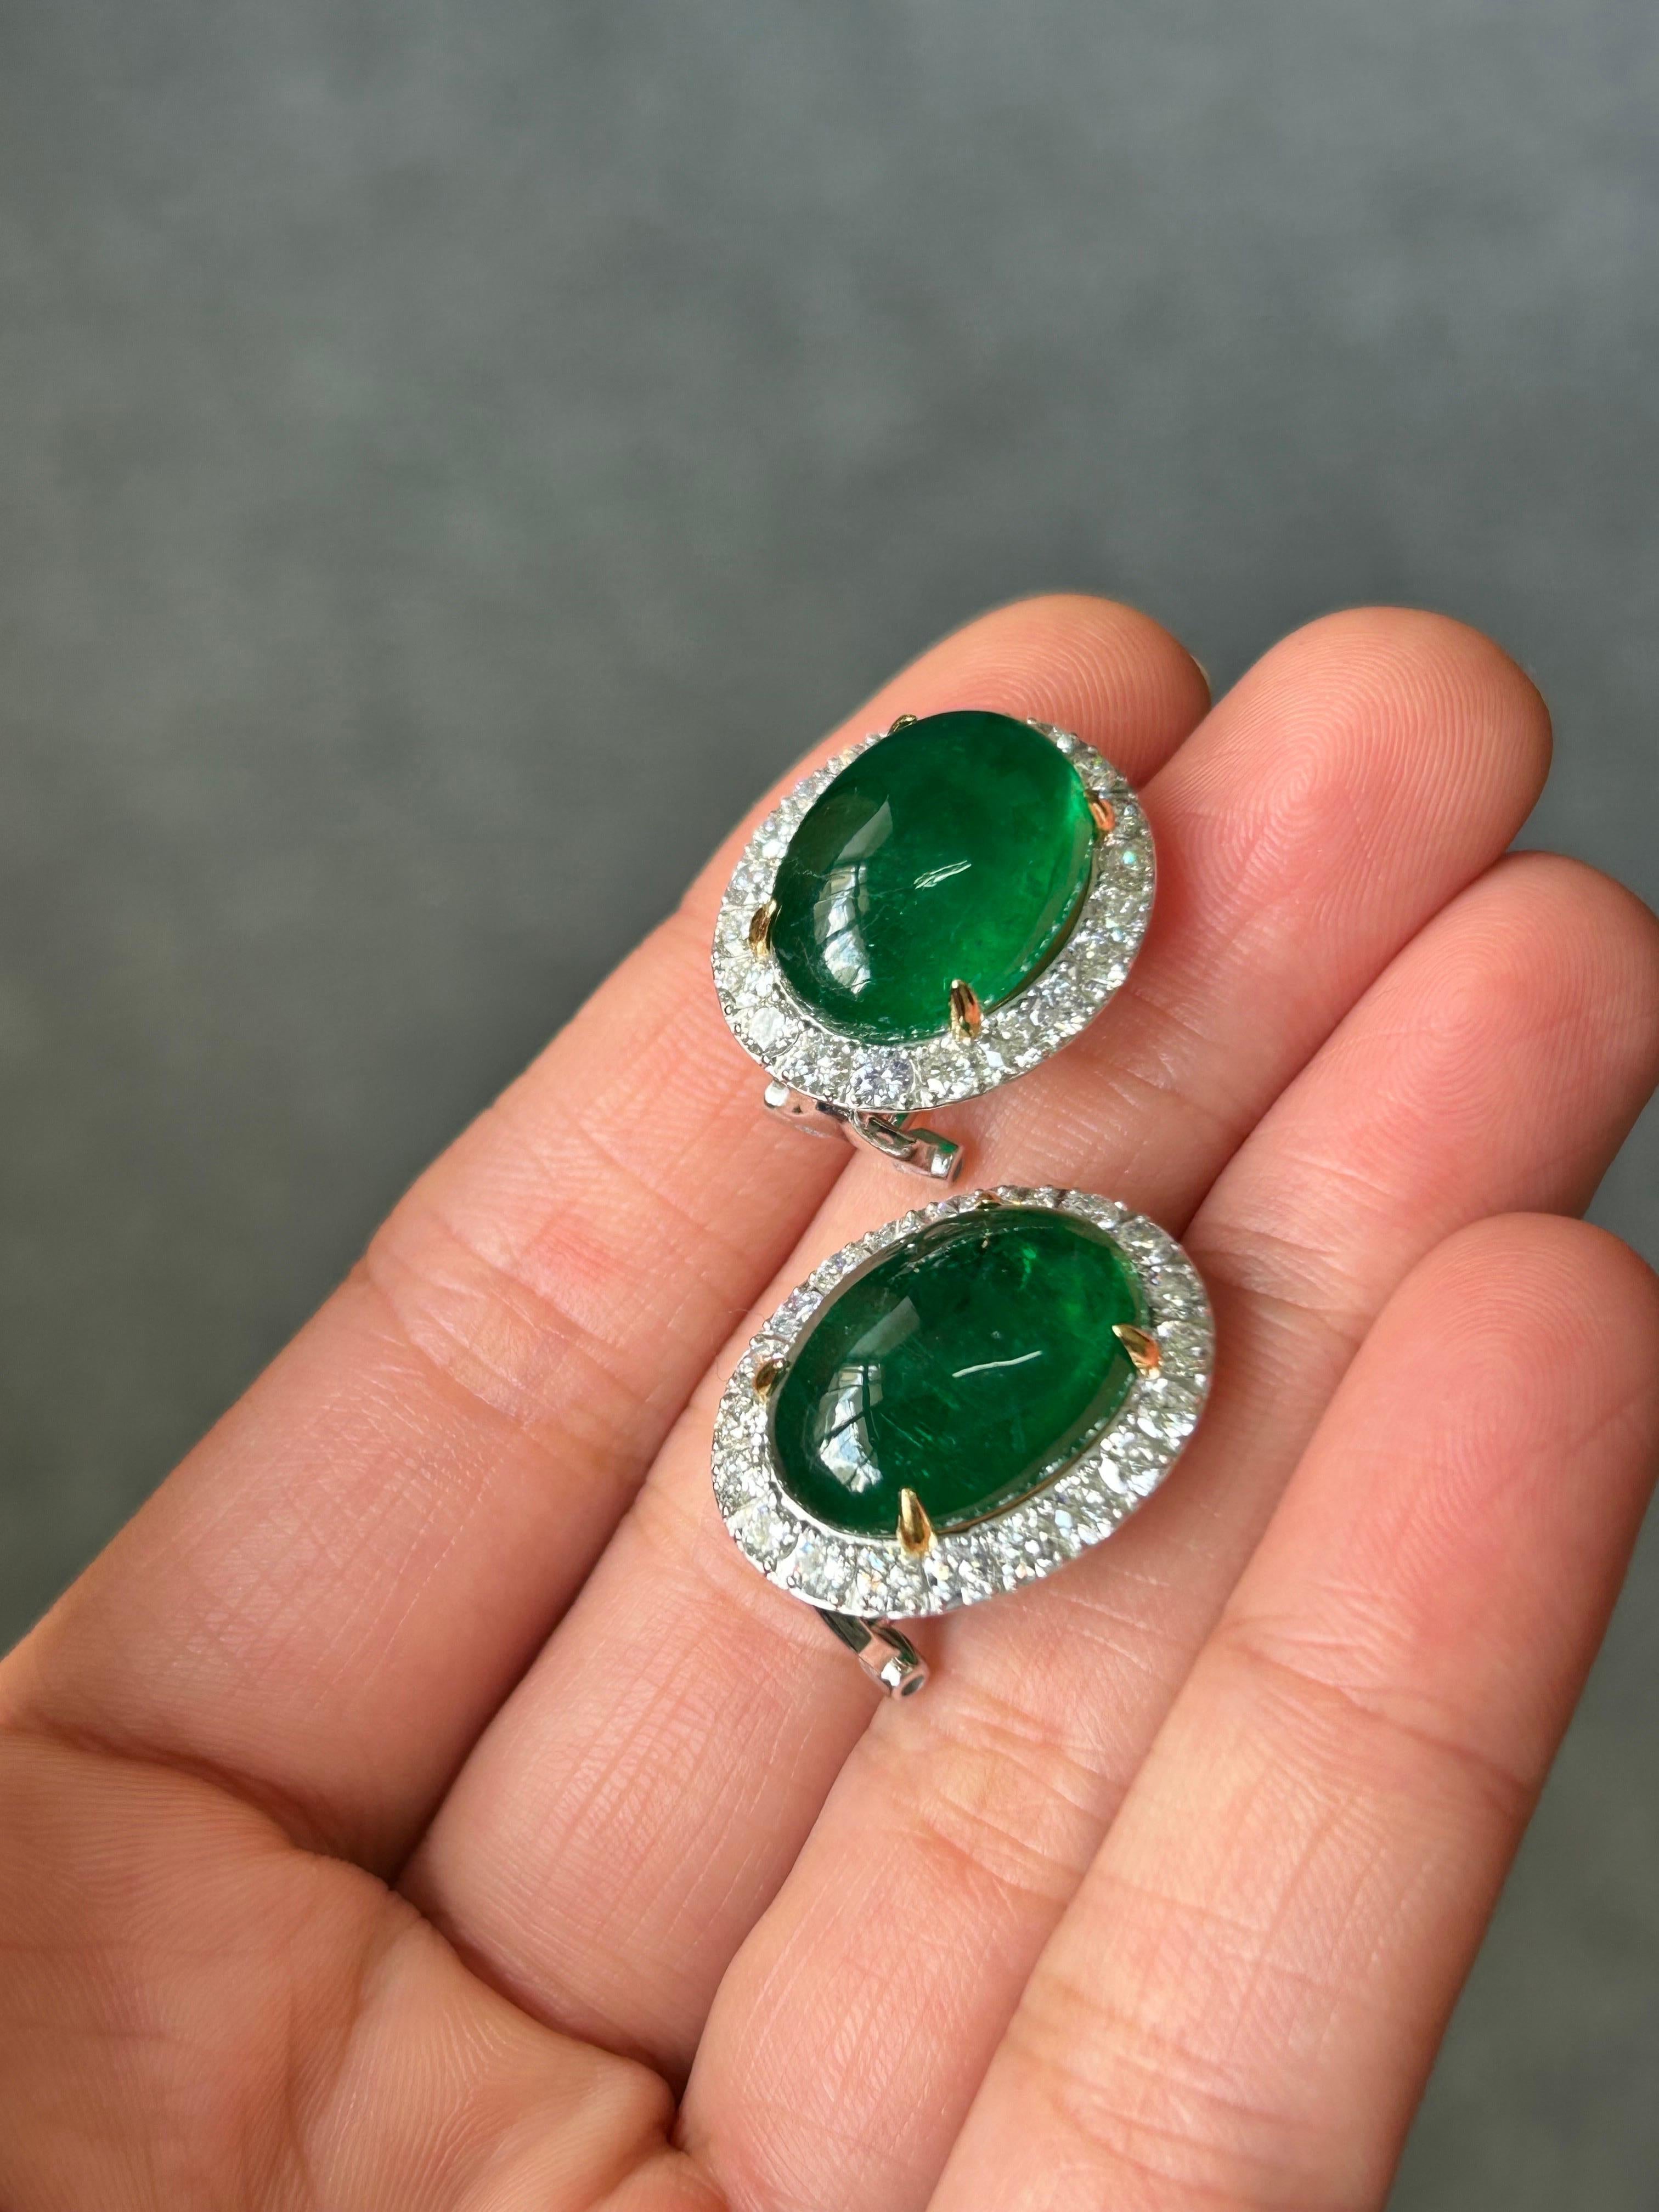 Zambian Emerald Cabochon outlined with Brilliant Cut Diamond Studs, with omega clip and 18K White Gold. Stunning center stones, with great luster and vivid green color. 

Center Stone Details: 
Stone: Zambian Emerald
Cut: Cabochon, Oval
Weight: